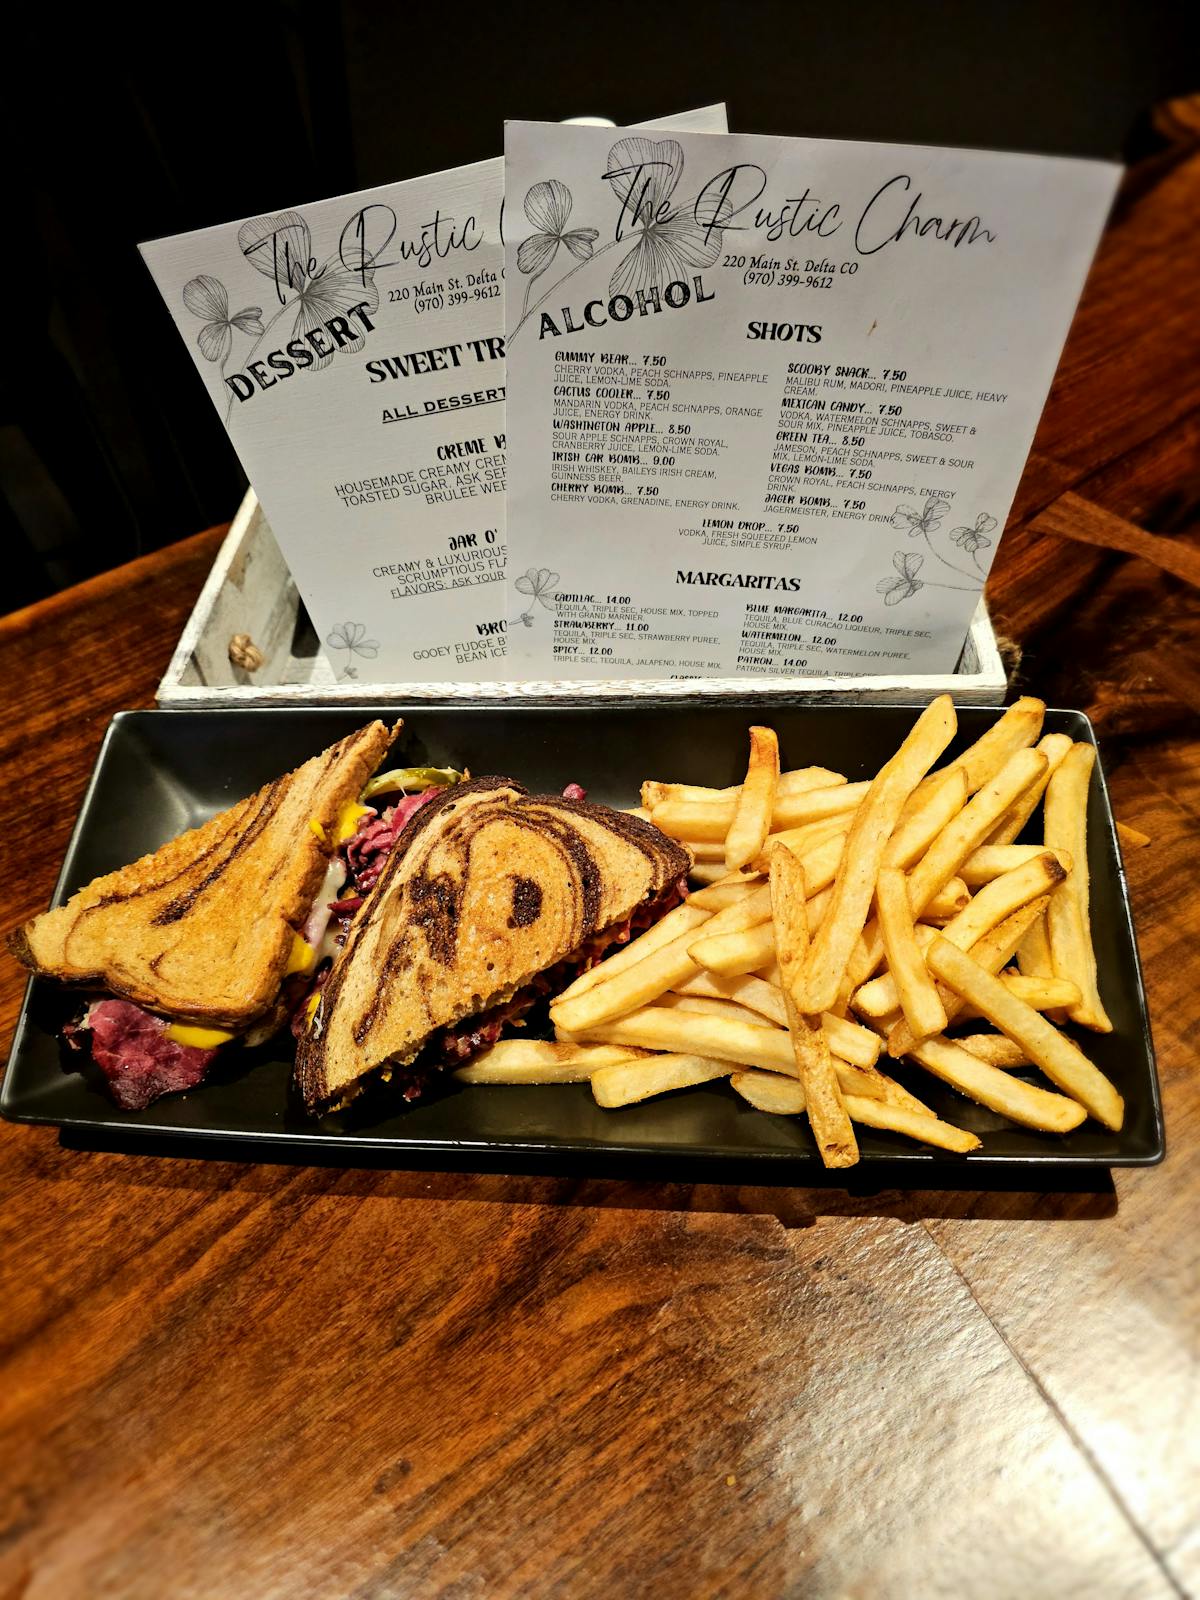 a sandwich and fries on a table